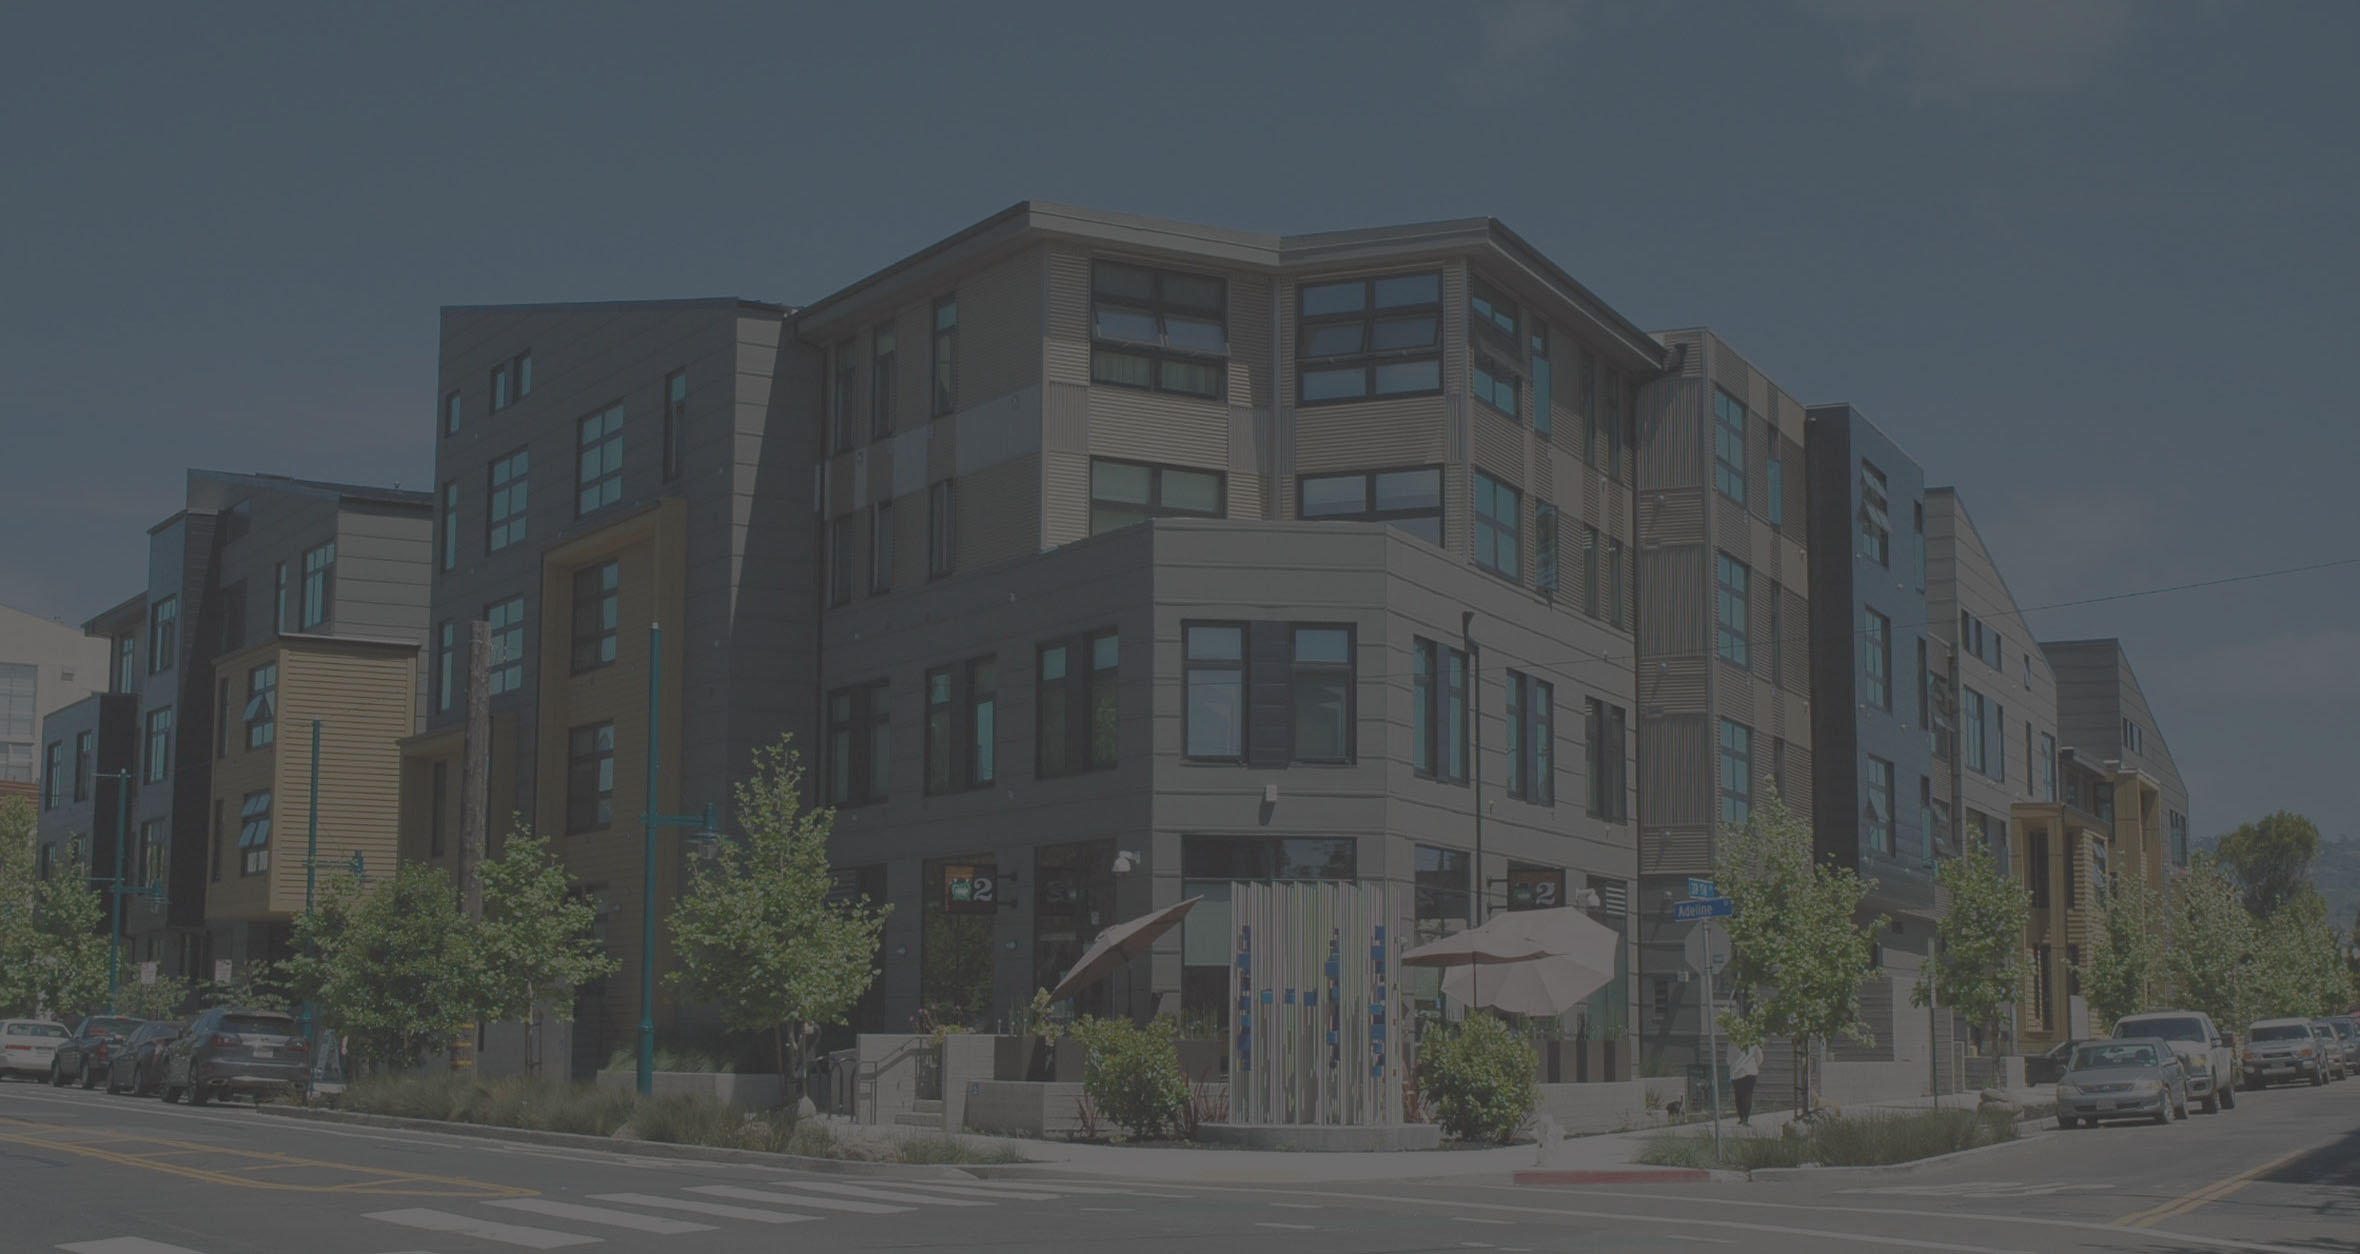  3900 Adeline is an infill mixed use development located on the Oakland/Emeryville border. This project incorporates 91 residential (1, 2 and 3 bedrooms), 10 live/work and 13 affordable units over ground level parking on a 1.1 acre site. This sustain